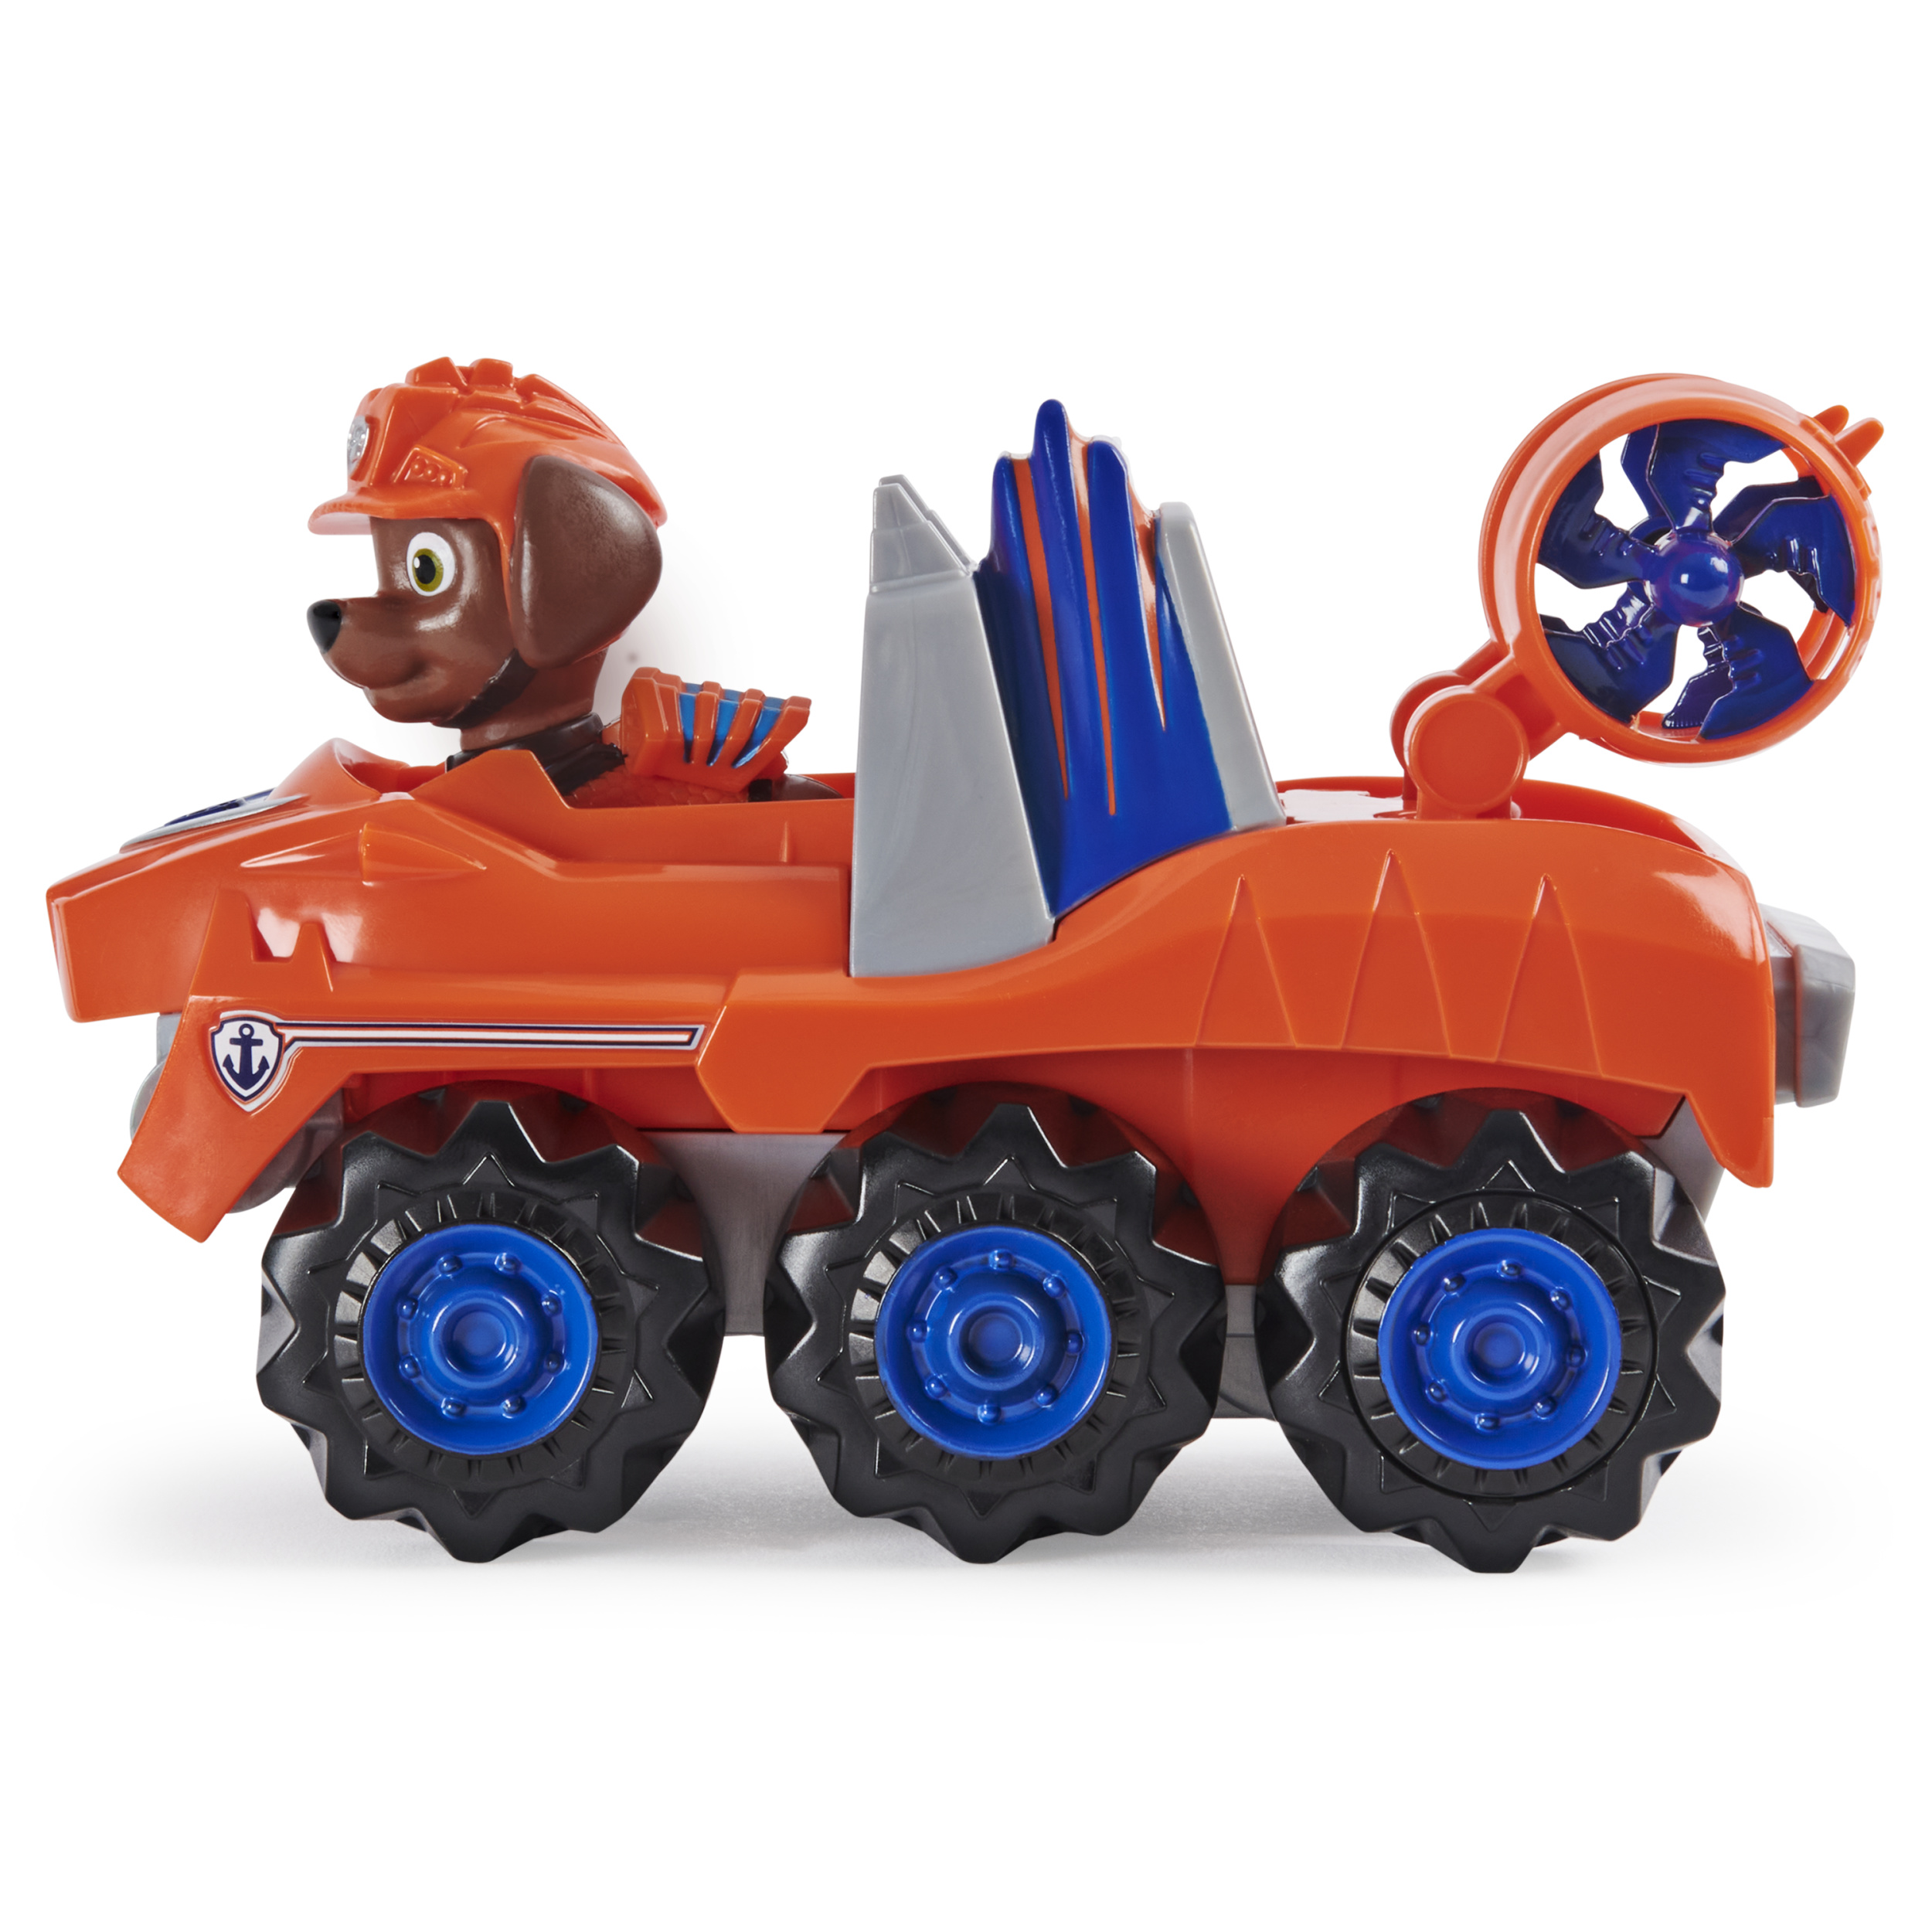 Paw Patrol Deluxe Dino Vehicles Assortment (Styles May Vary) - image 3 of 6